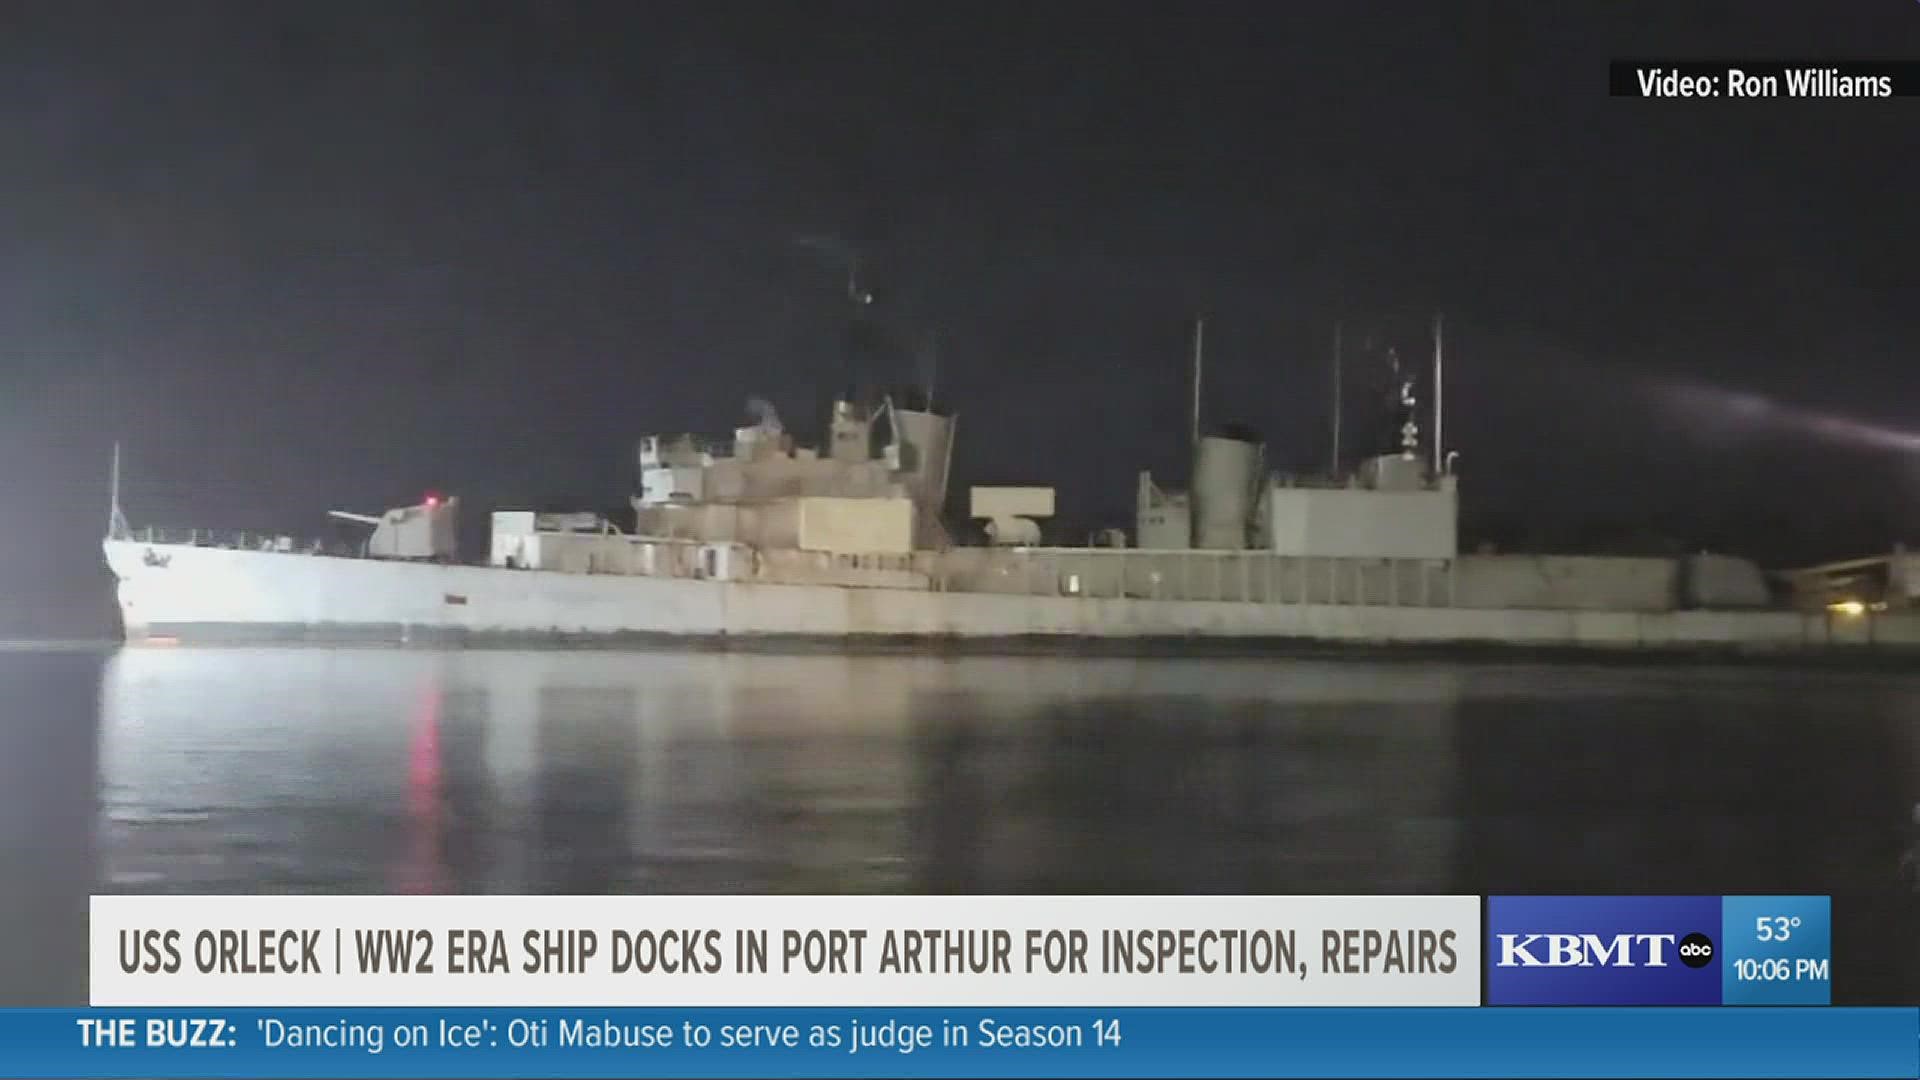 The ship is expected to be in Port Arthur for about a month. It will be washed and inspected. It will then be evaluated to determine what work needs to be done.